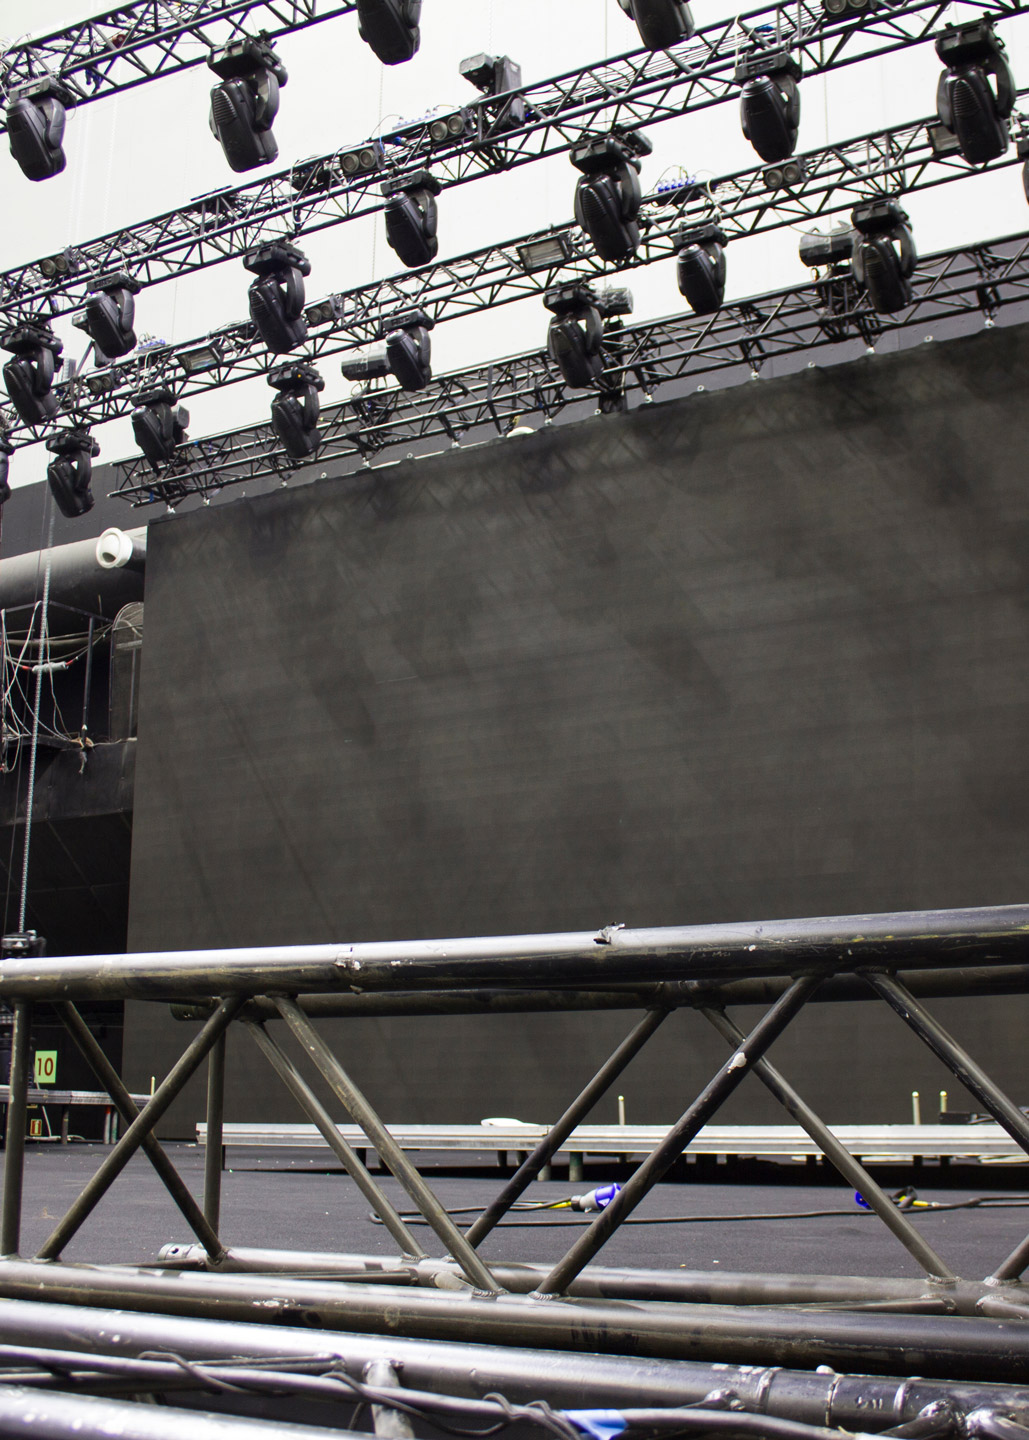 An event stage with an LED screen